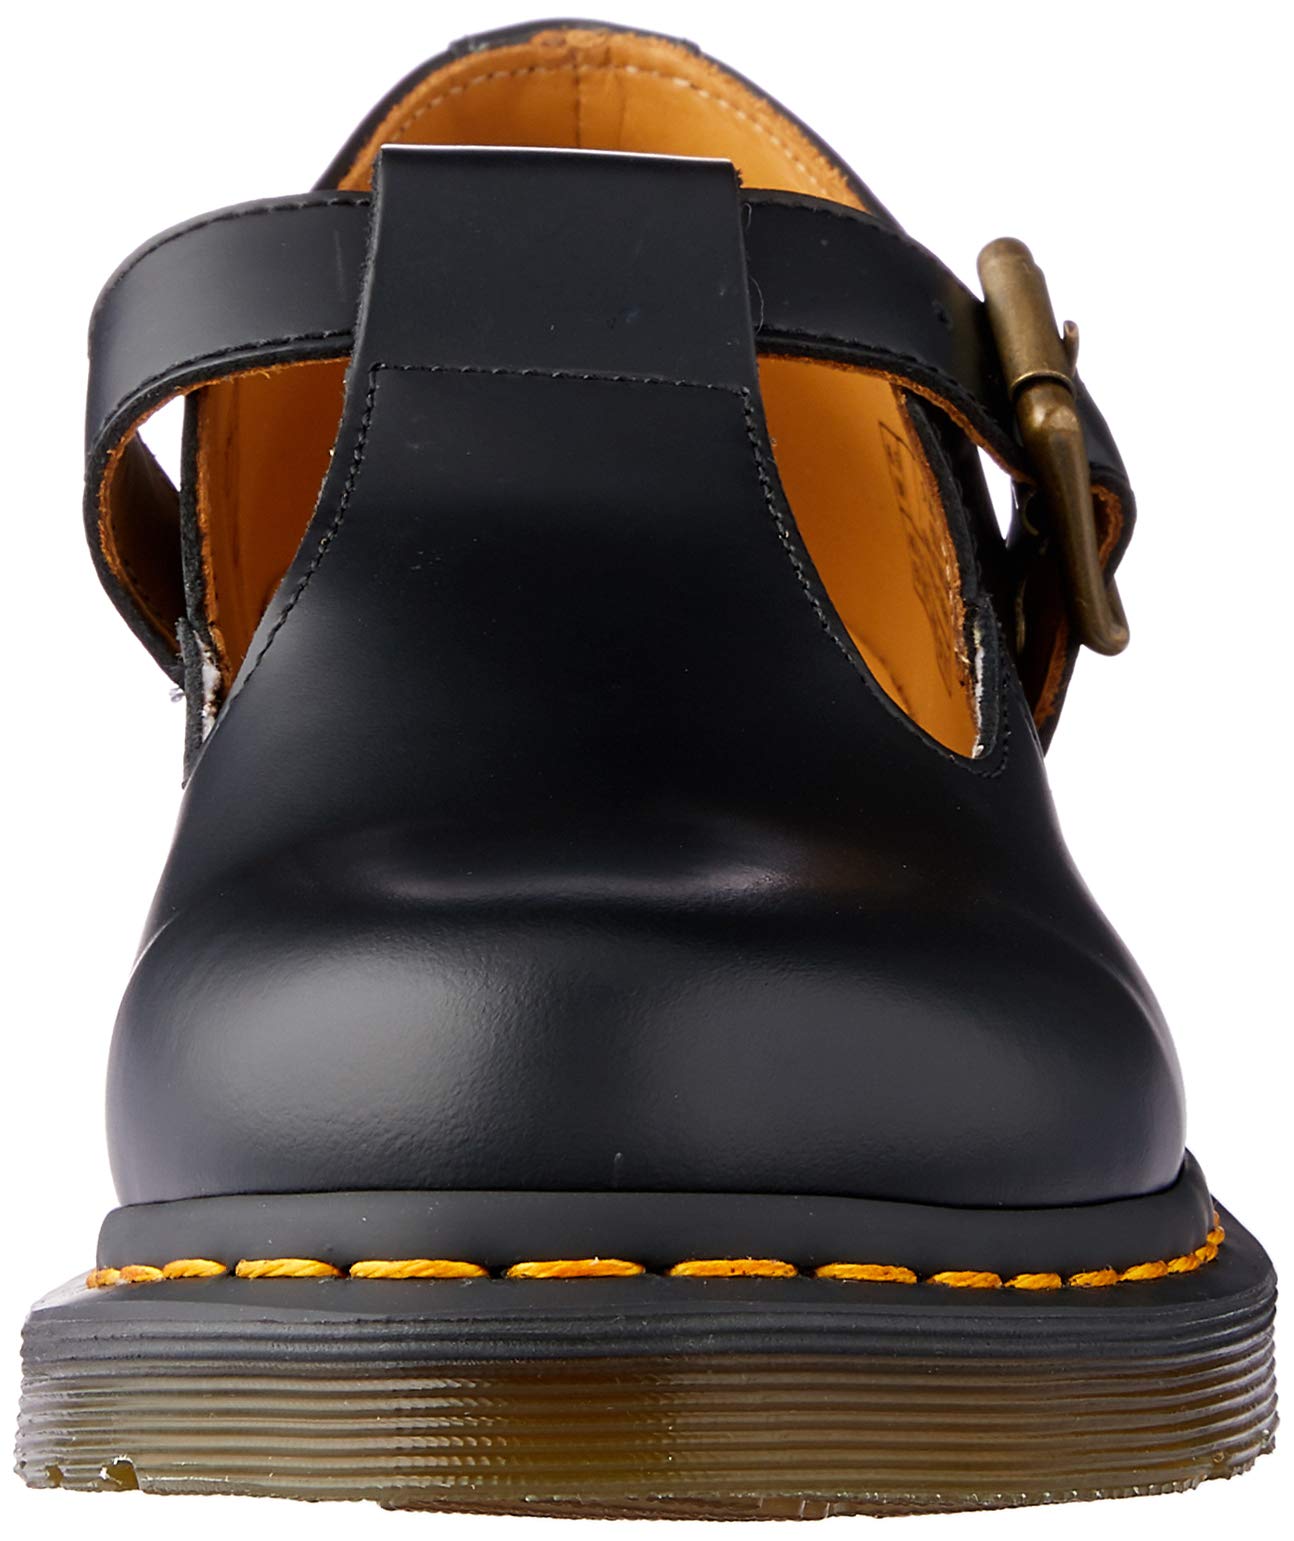 Dr. Martens Women's Polley Mary Jane Flat